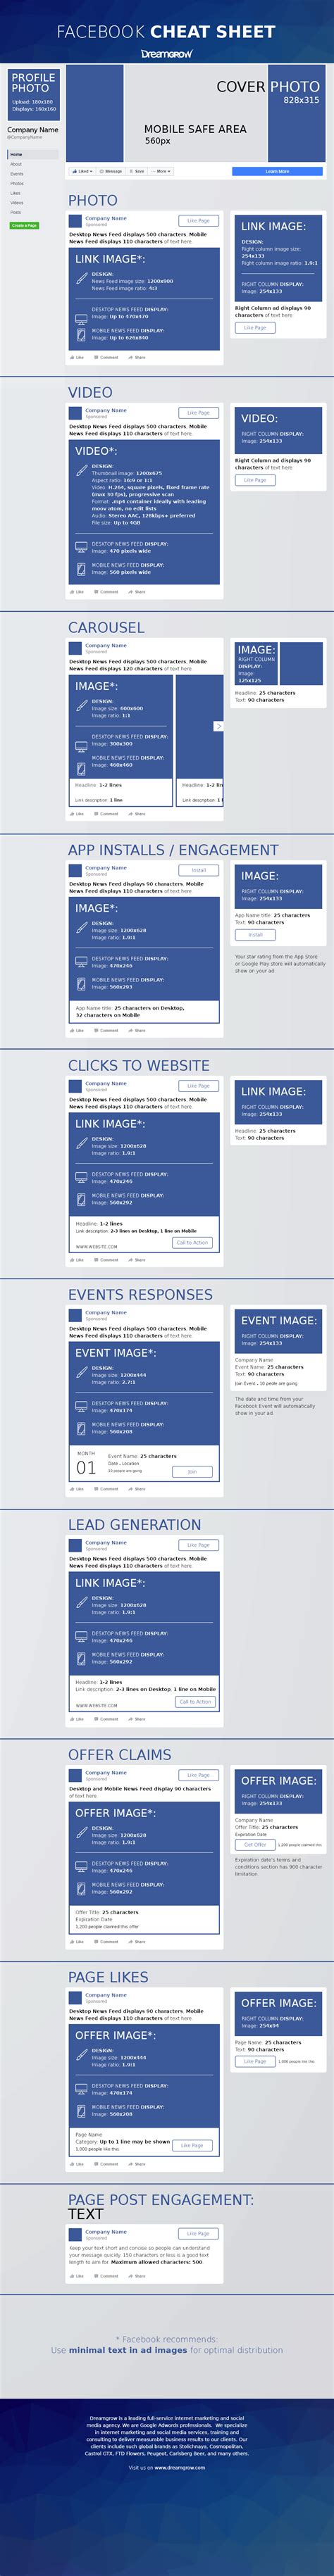 The Ultimate Cheat Sheet For Facebook Image Sizes Inf